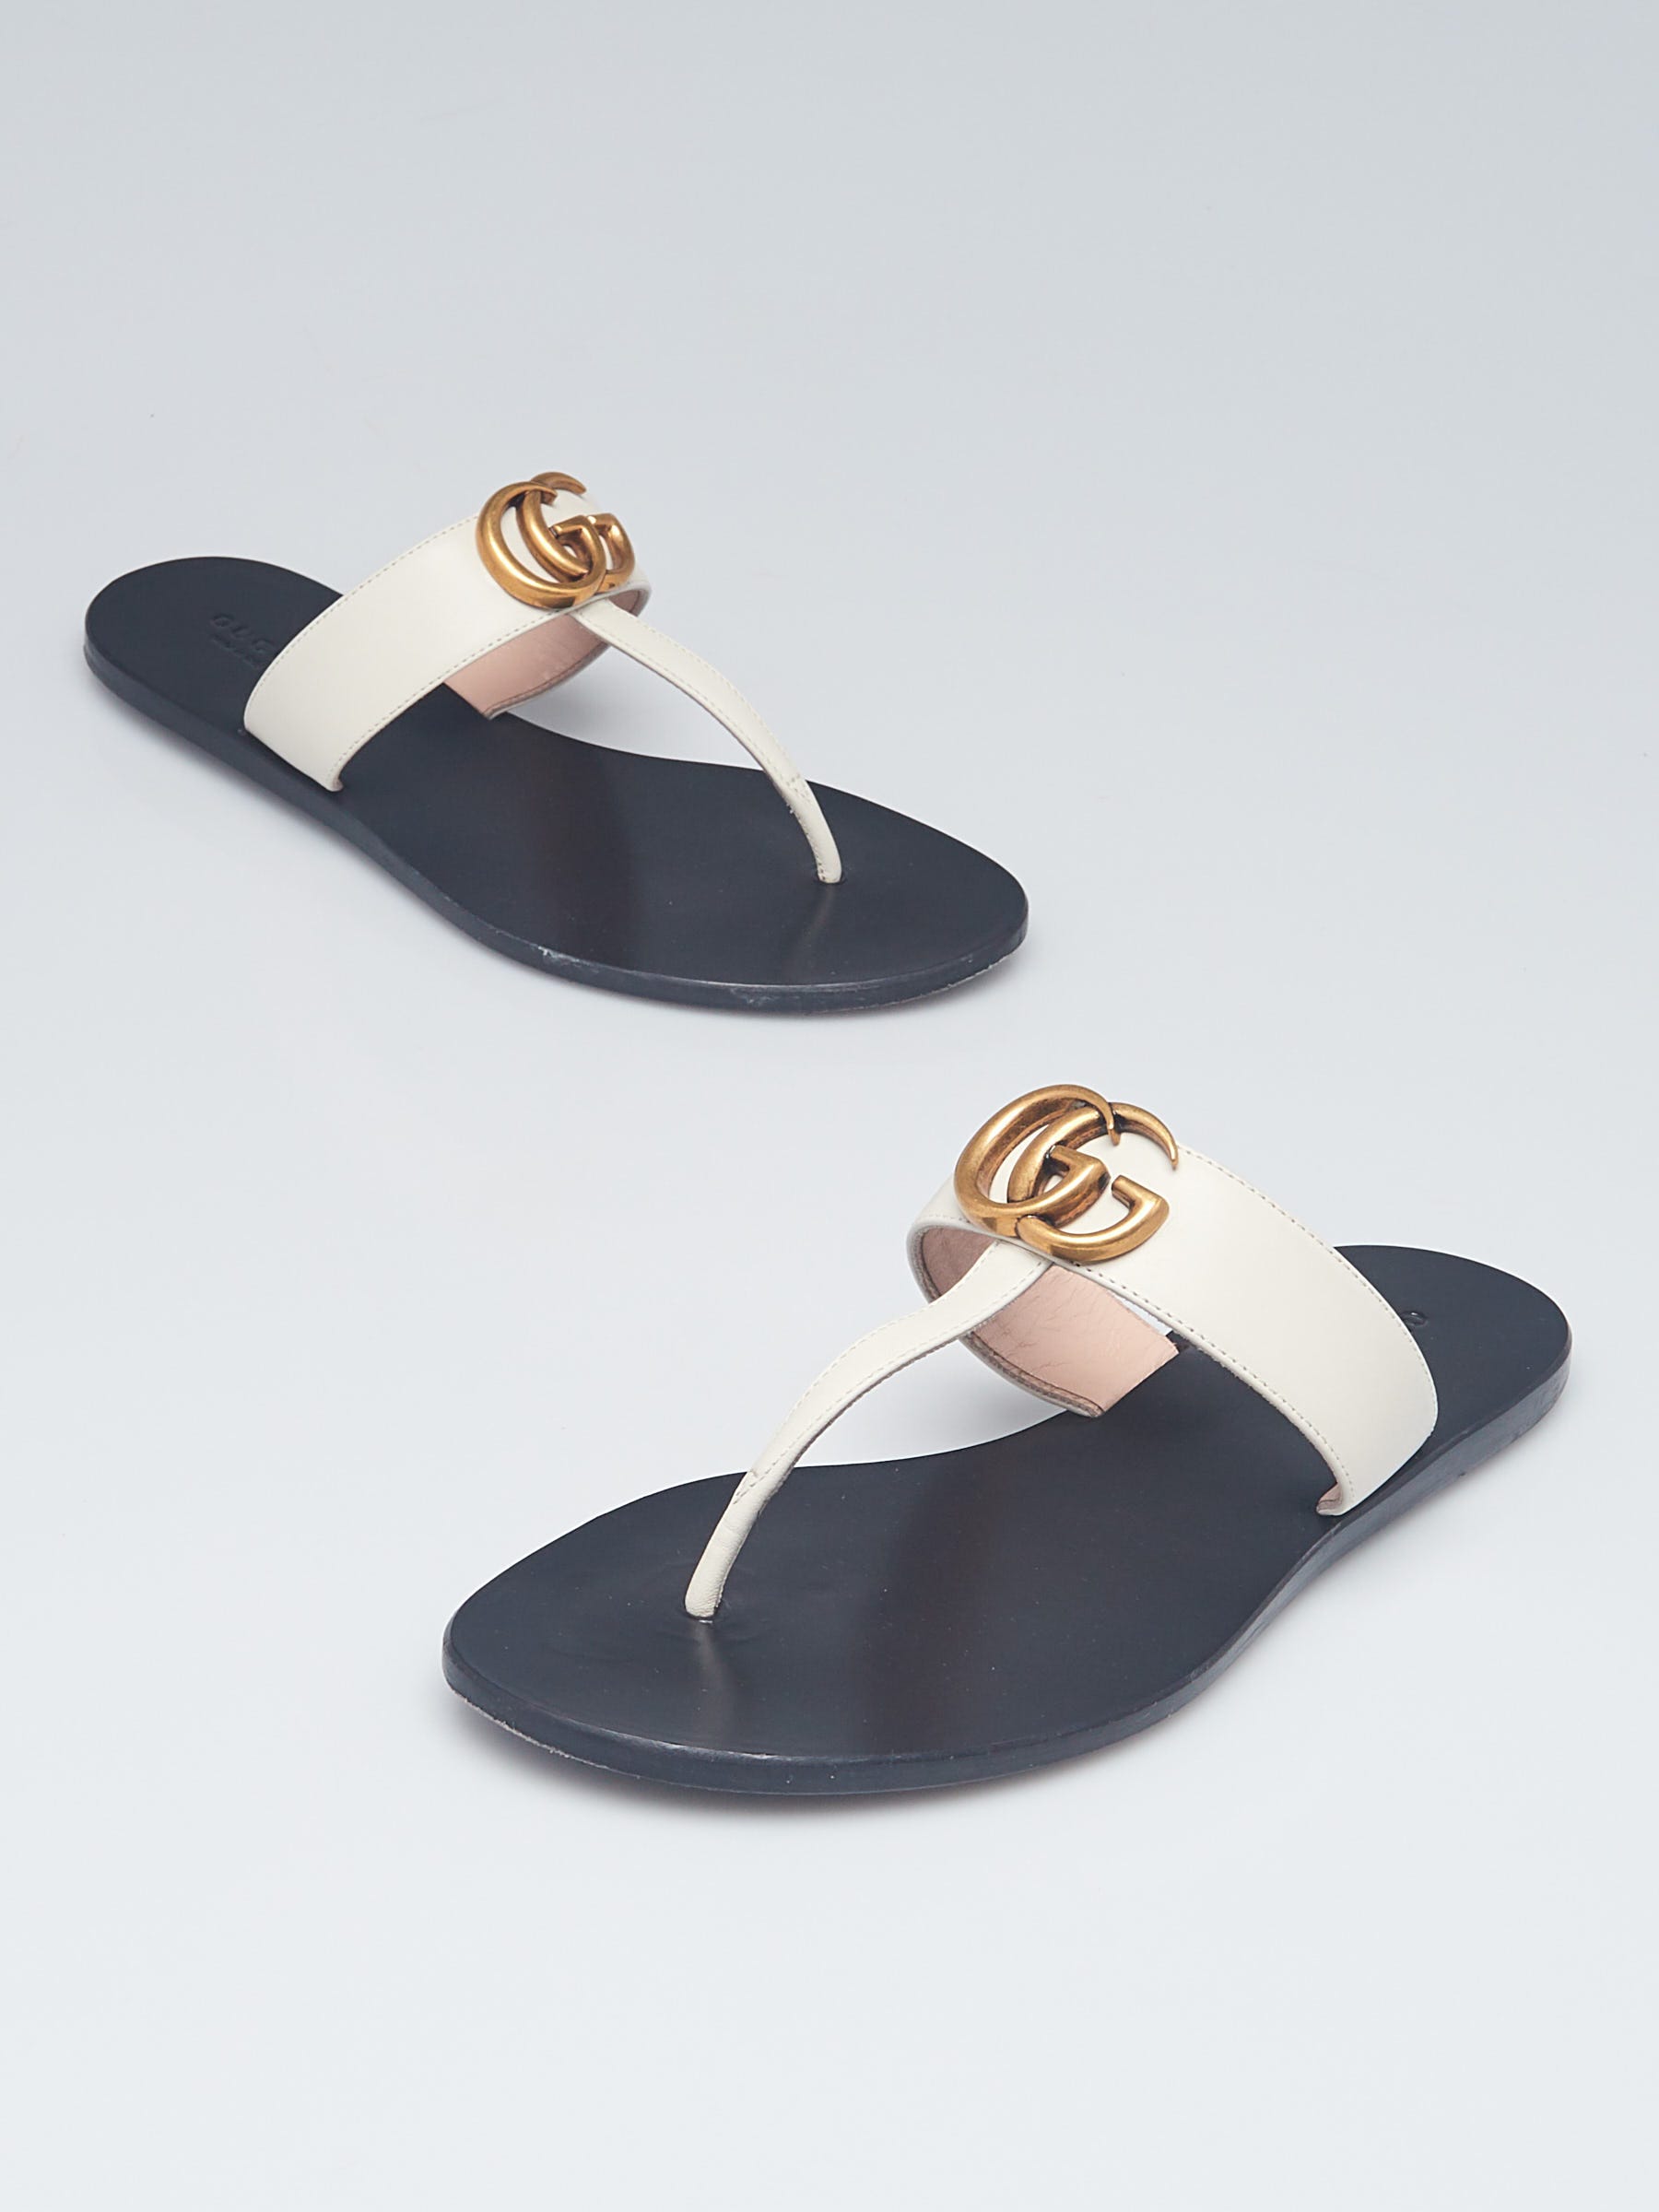 GG Leather Thong Sandals in White - Gucci